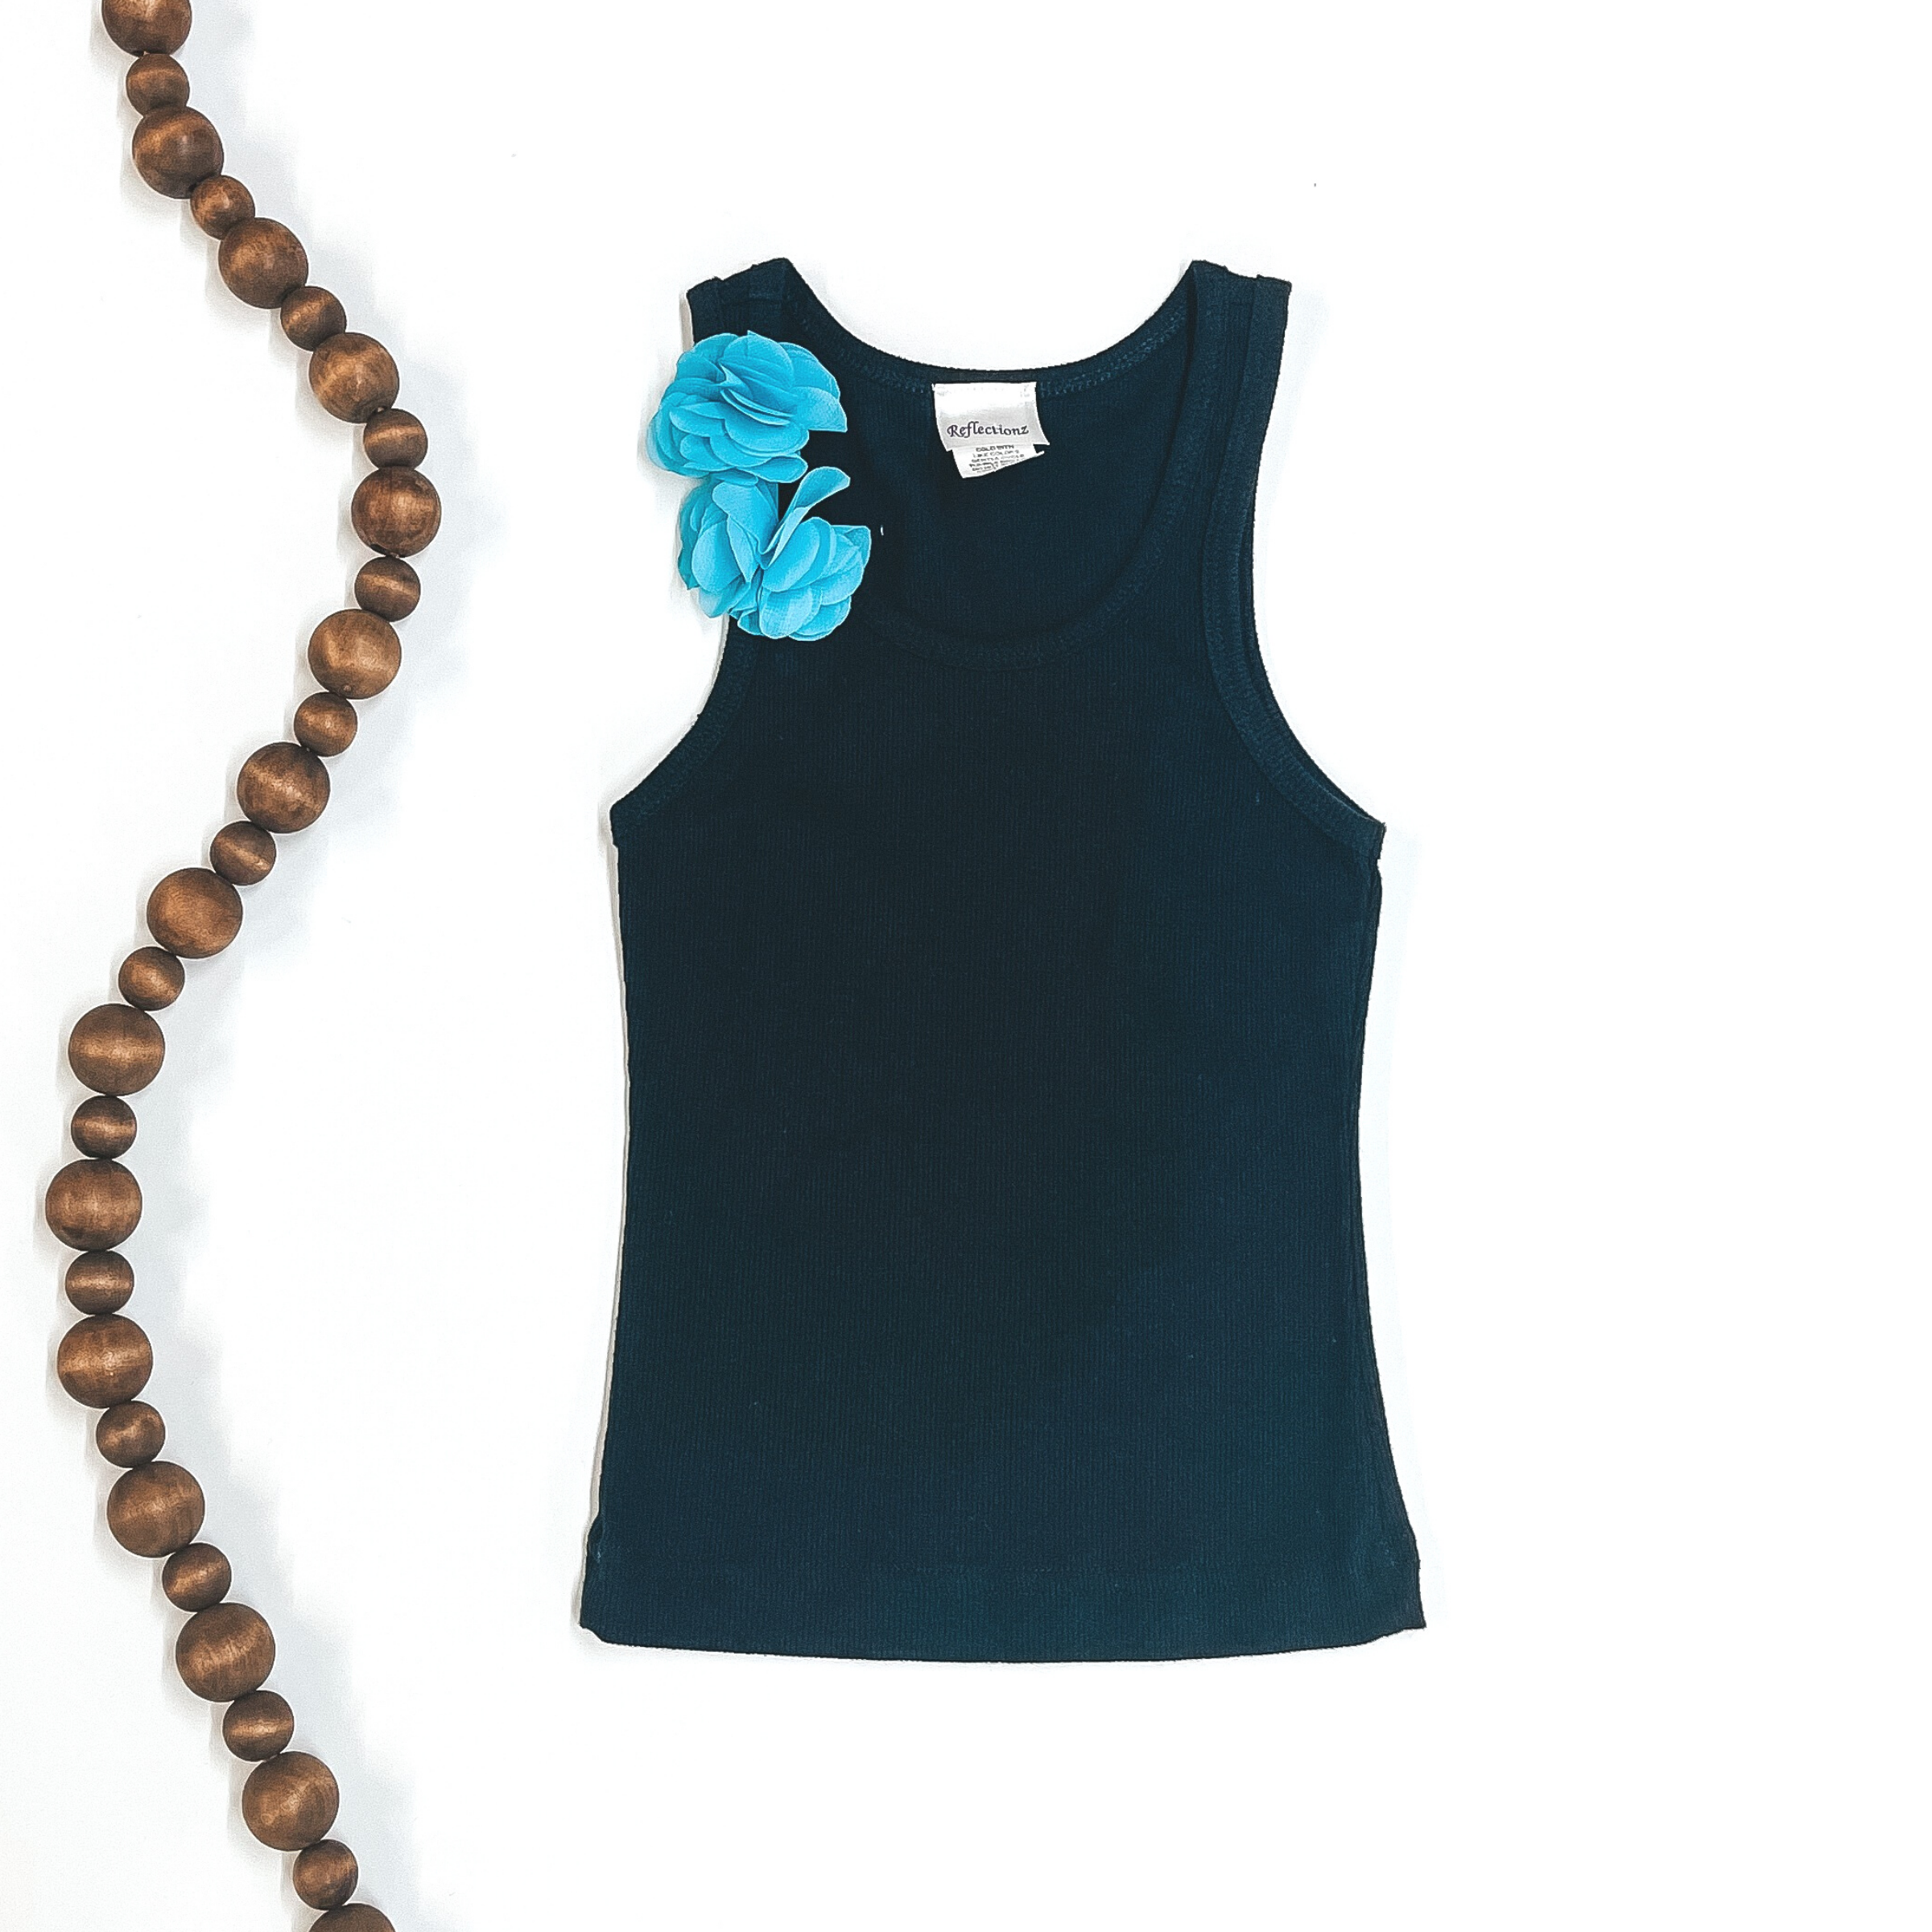 Last Chance Size Kid's 6 | Children's | Black Ribbed Tank Top with Turquoise Flowers | ONLY 1 LEFT! - Giddy Up Glamour Boutique